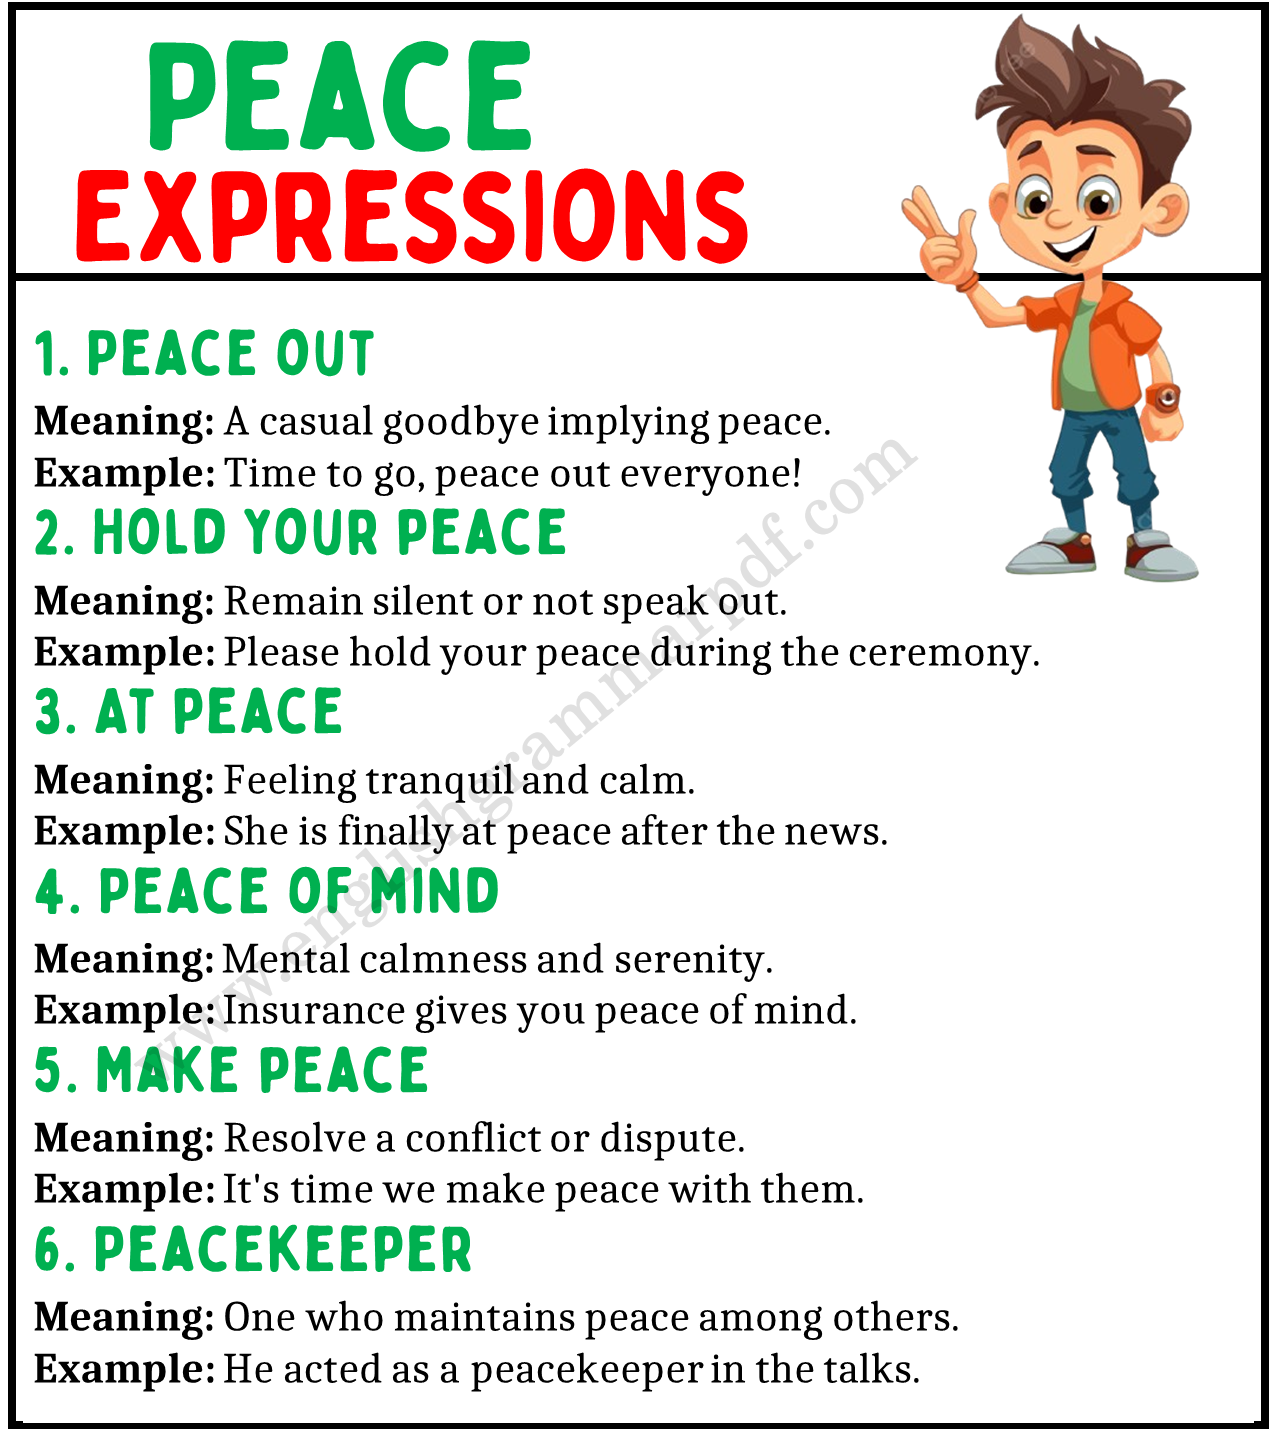 PEACE Expressions